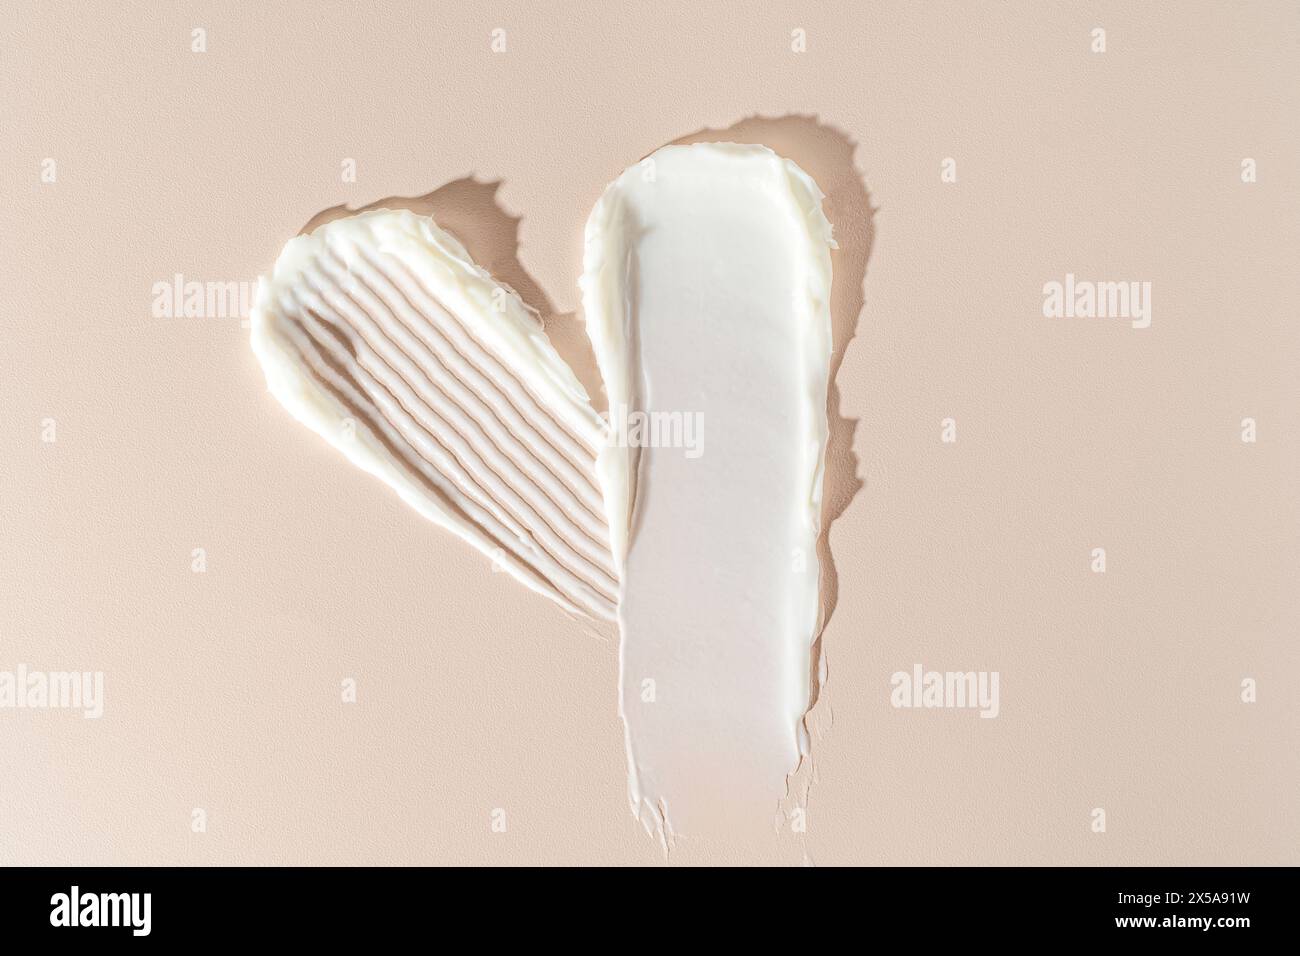 A creative display of two white cream textures forming a heart-shape against a smooth beige backdrop, perfect for skincare or culinary themes Stock Photo